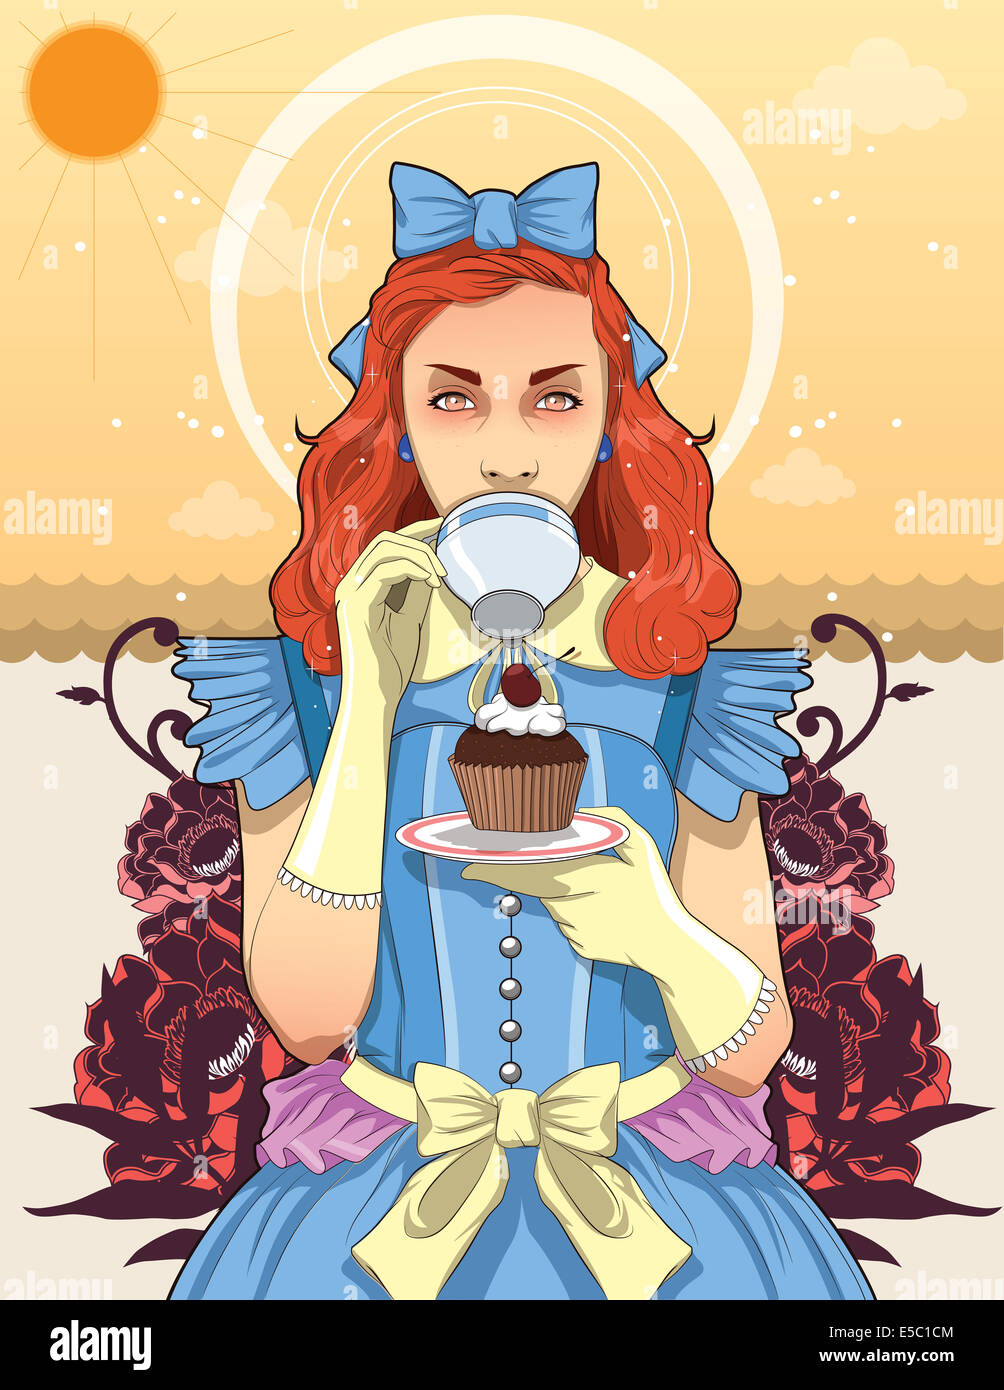 Illustration of trendy teenage girl drinking coffee while holding cupcake in plate Stock Photo